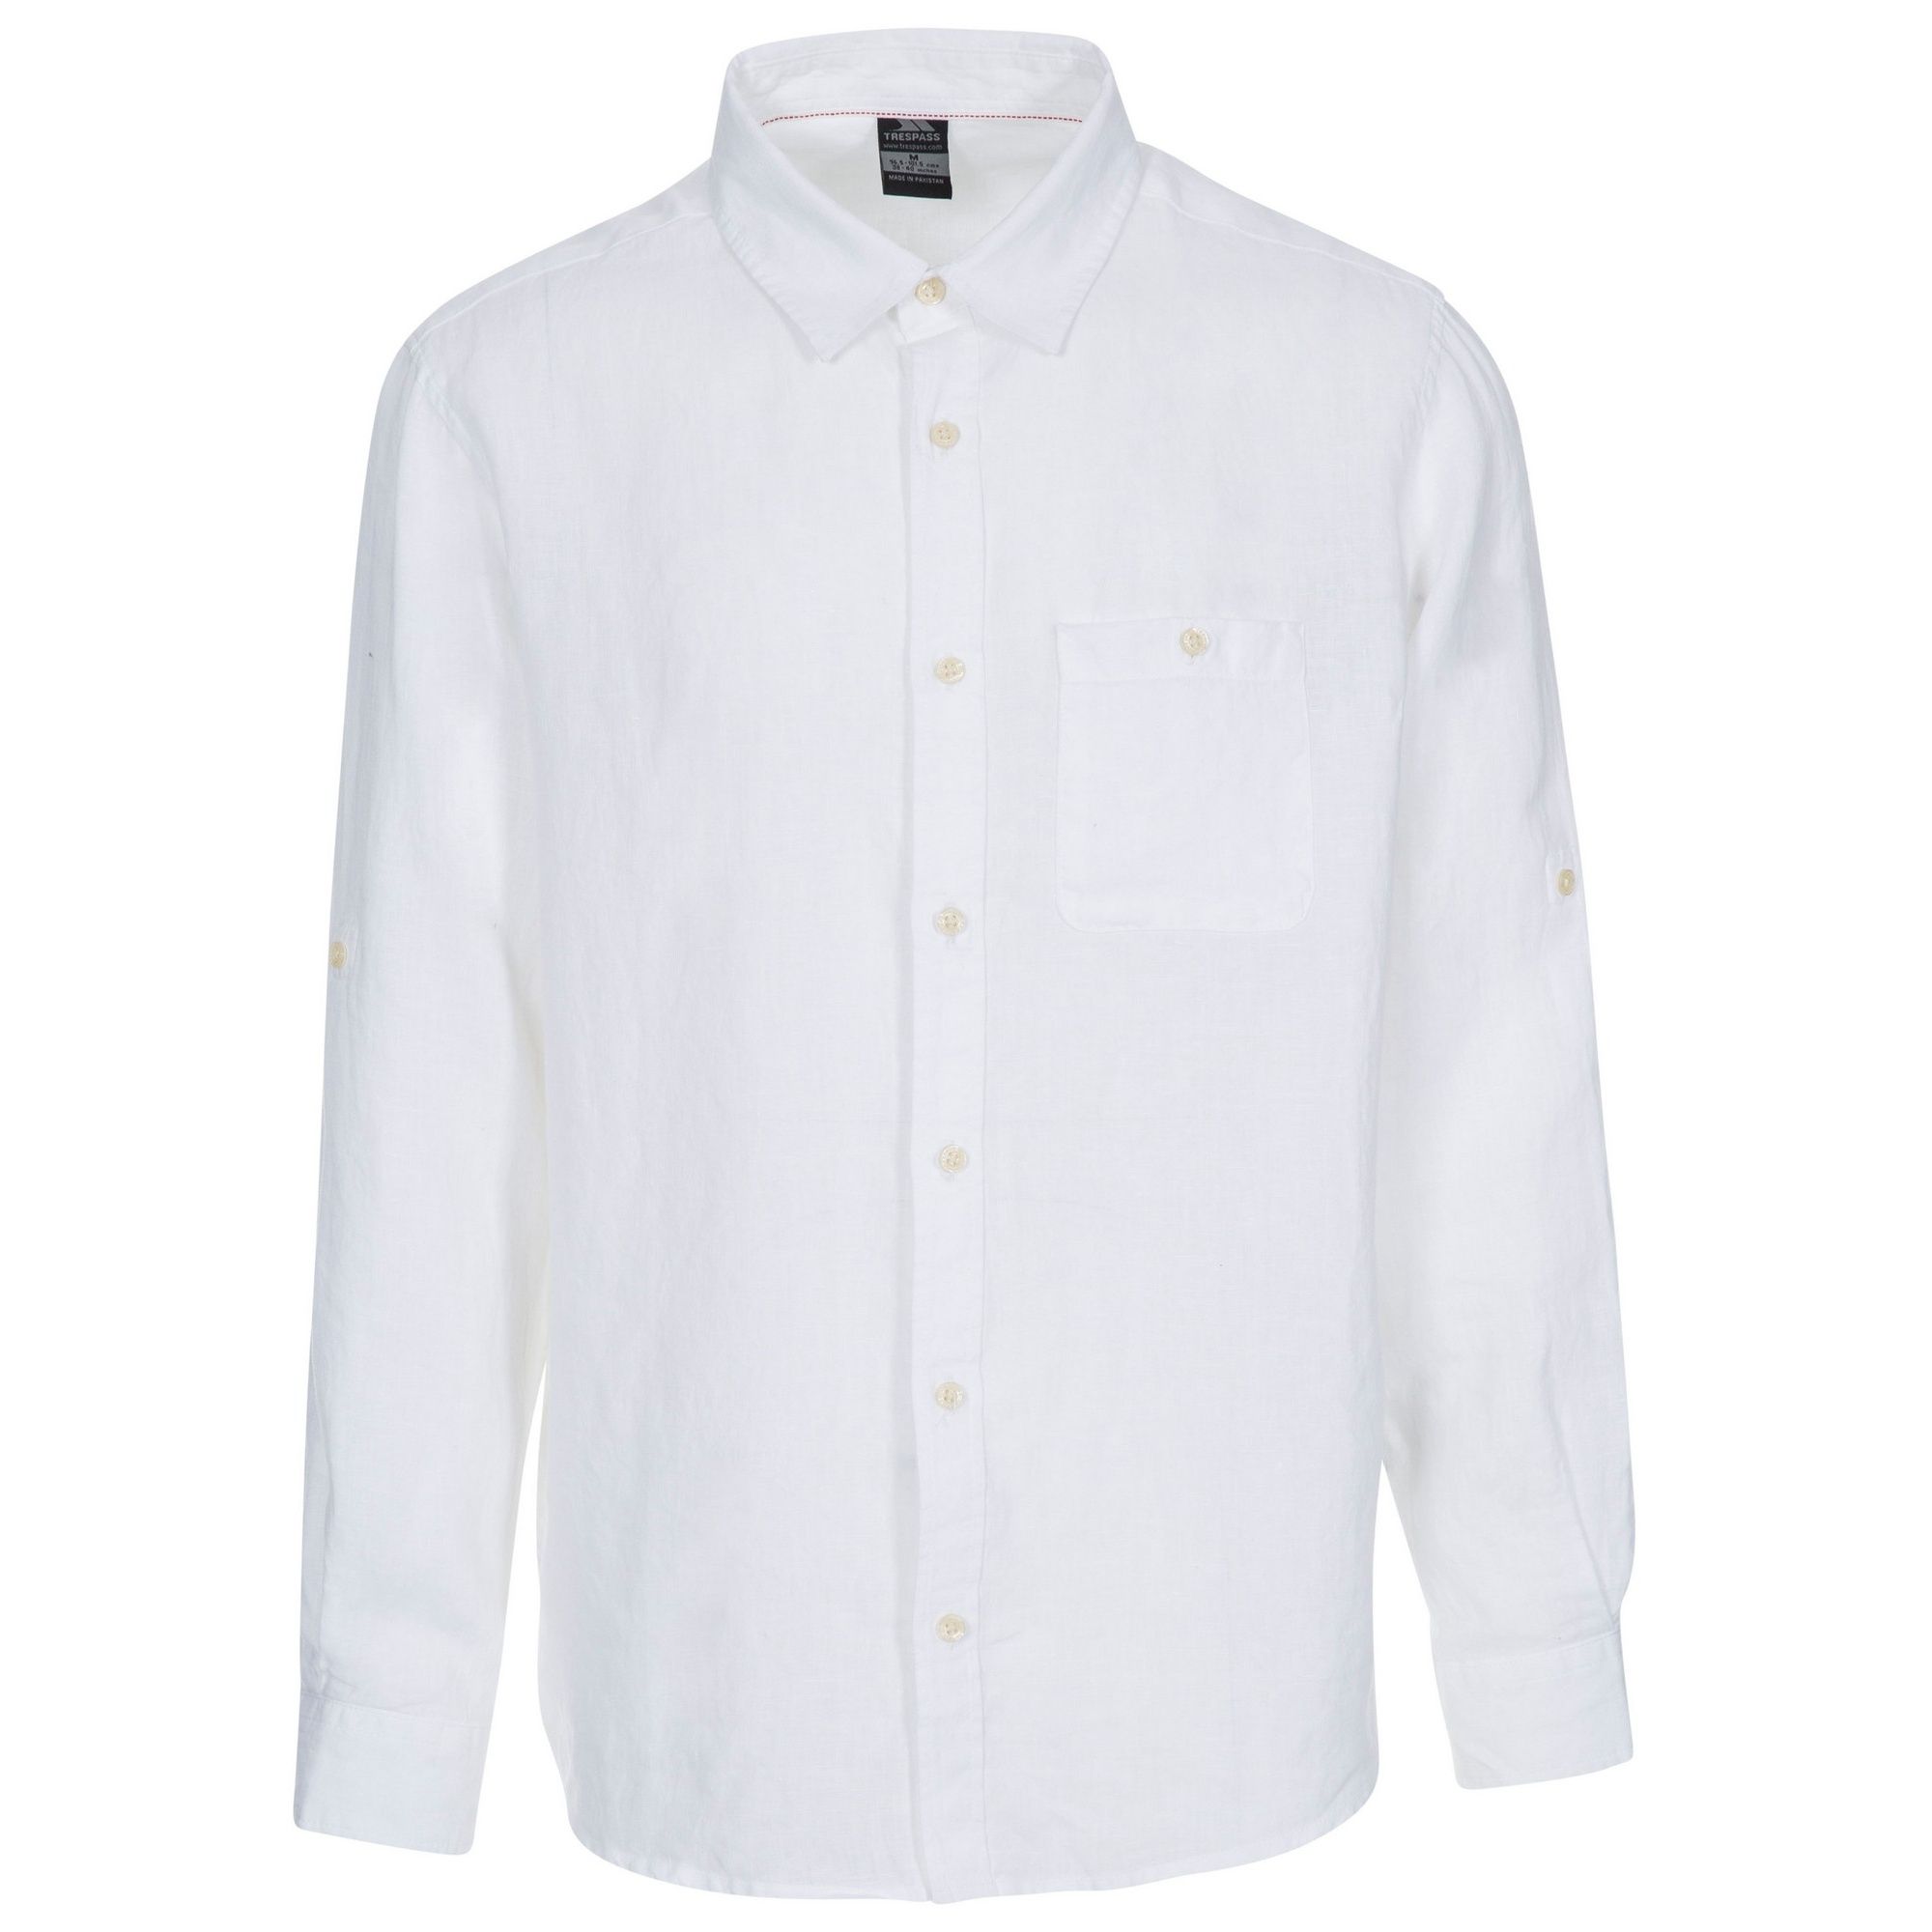 2 piece collar. Chest pocket. Button fastening. Breathable. 100% Linen. Trespass Mens Chest Sizing (approx): S - 35-37in/89-94cm, M - 38-40in/96.5-101.5cm, L - 41-43in/104-109cm, XL - 44-46in/111.5-117cm, XXL - 46-48in/117-122cm, 3XL - 48-50in/122-127cm.